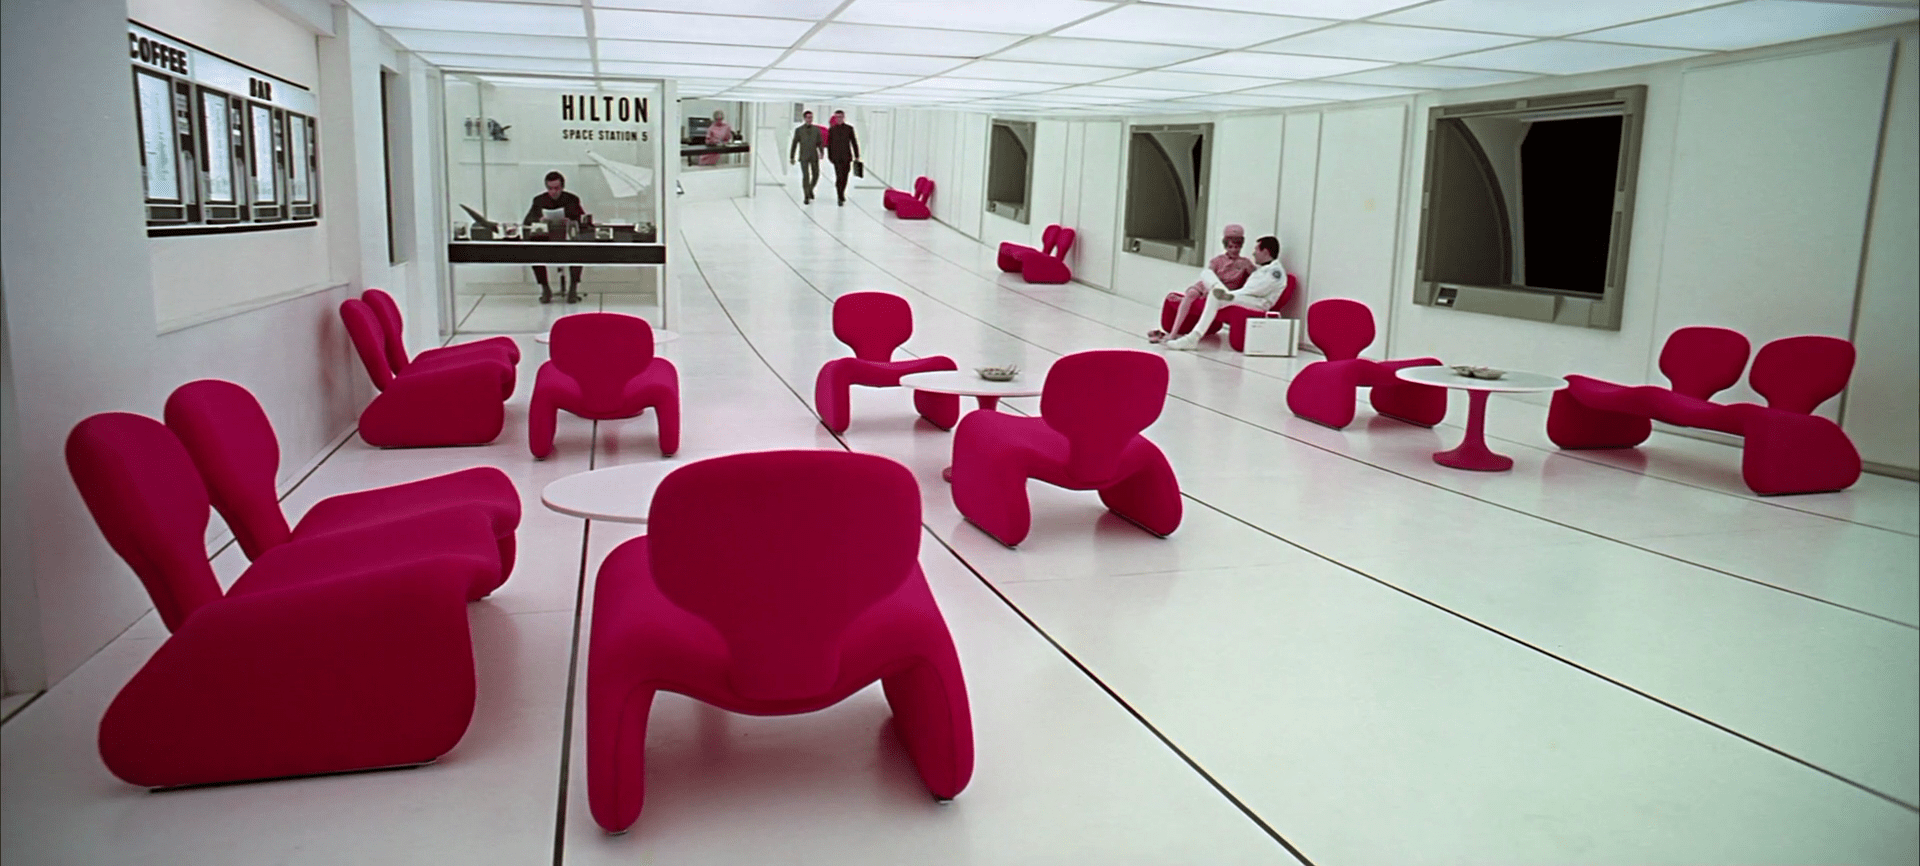 2001: A Space Odyssey - Film and Furniture